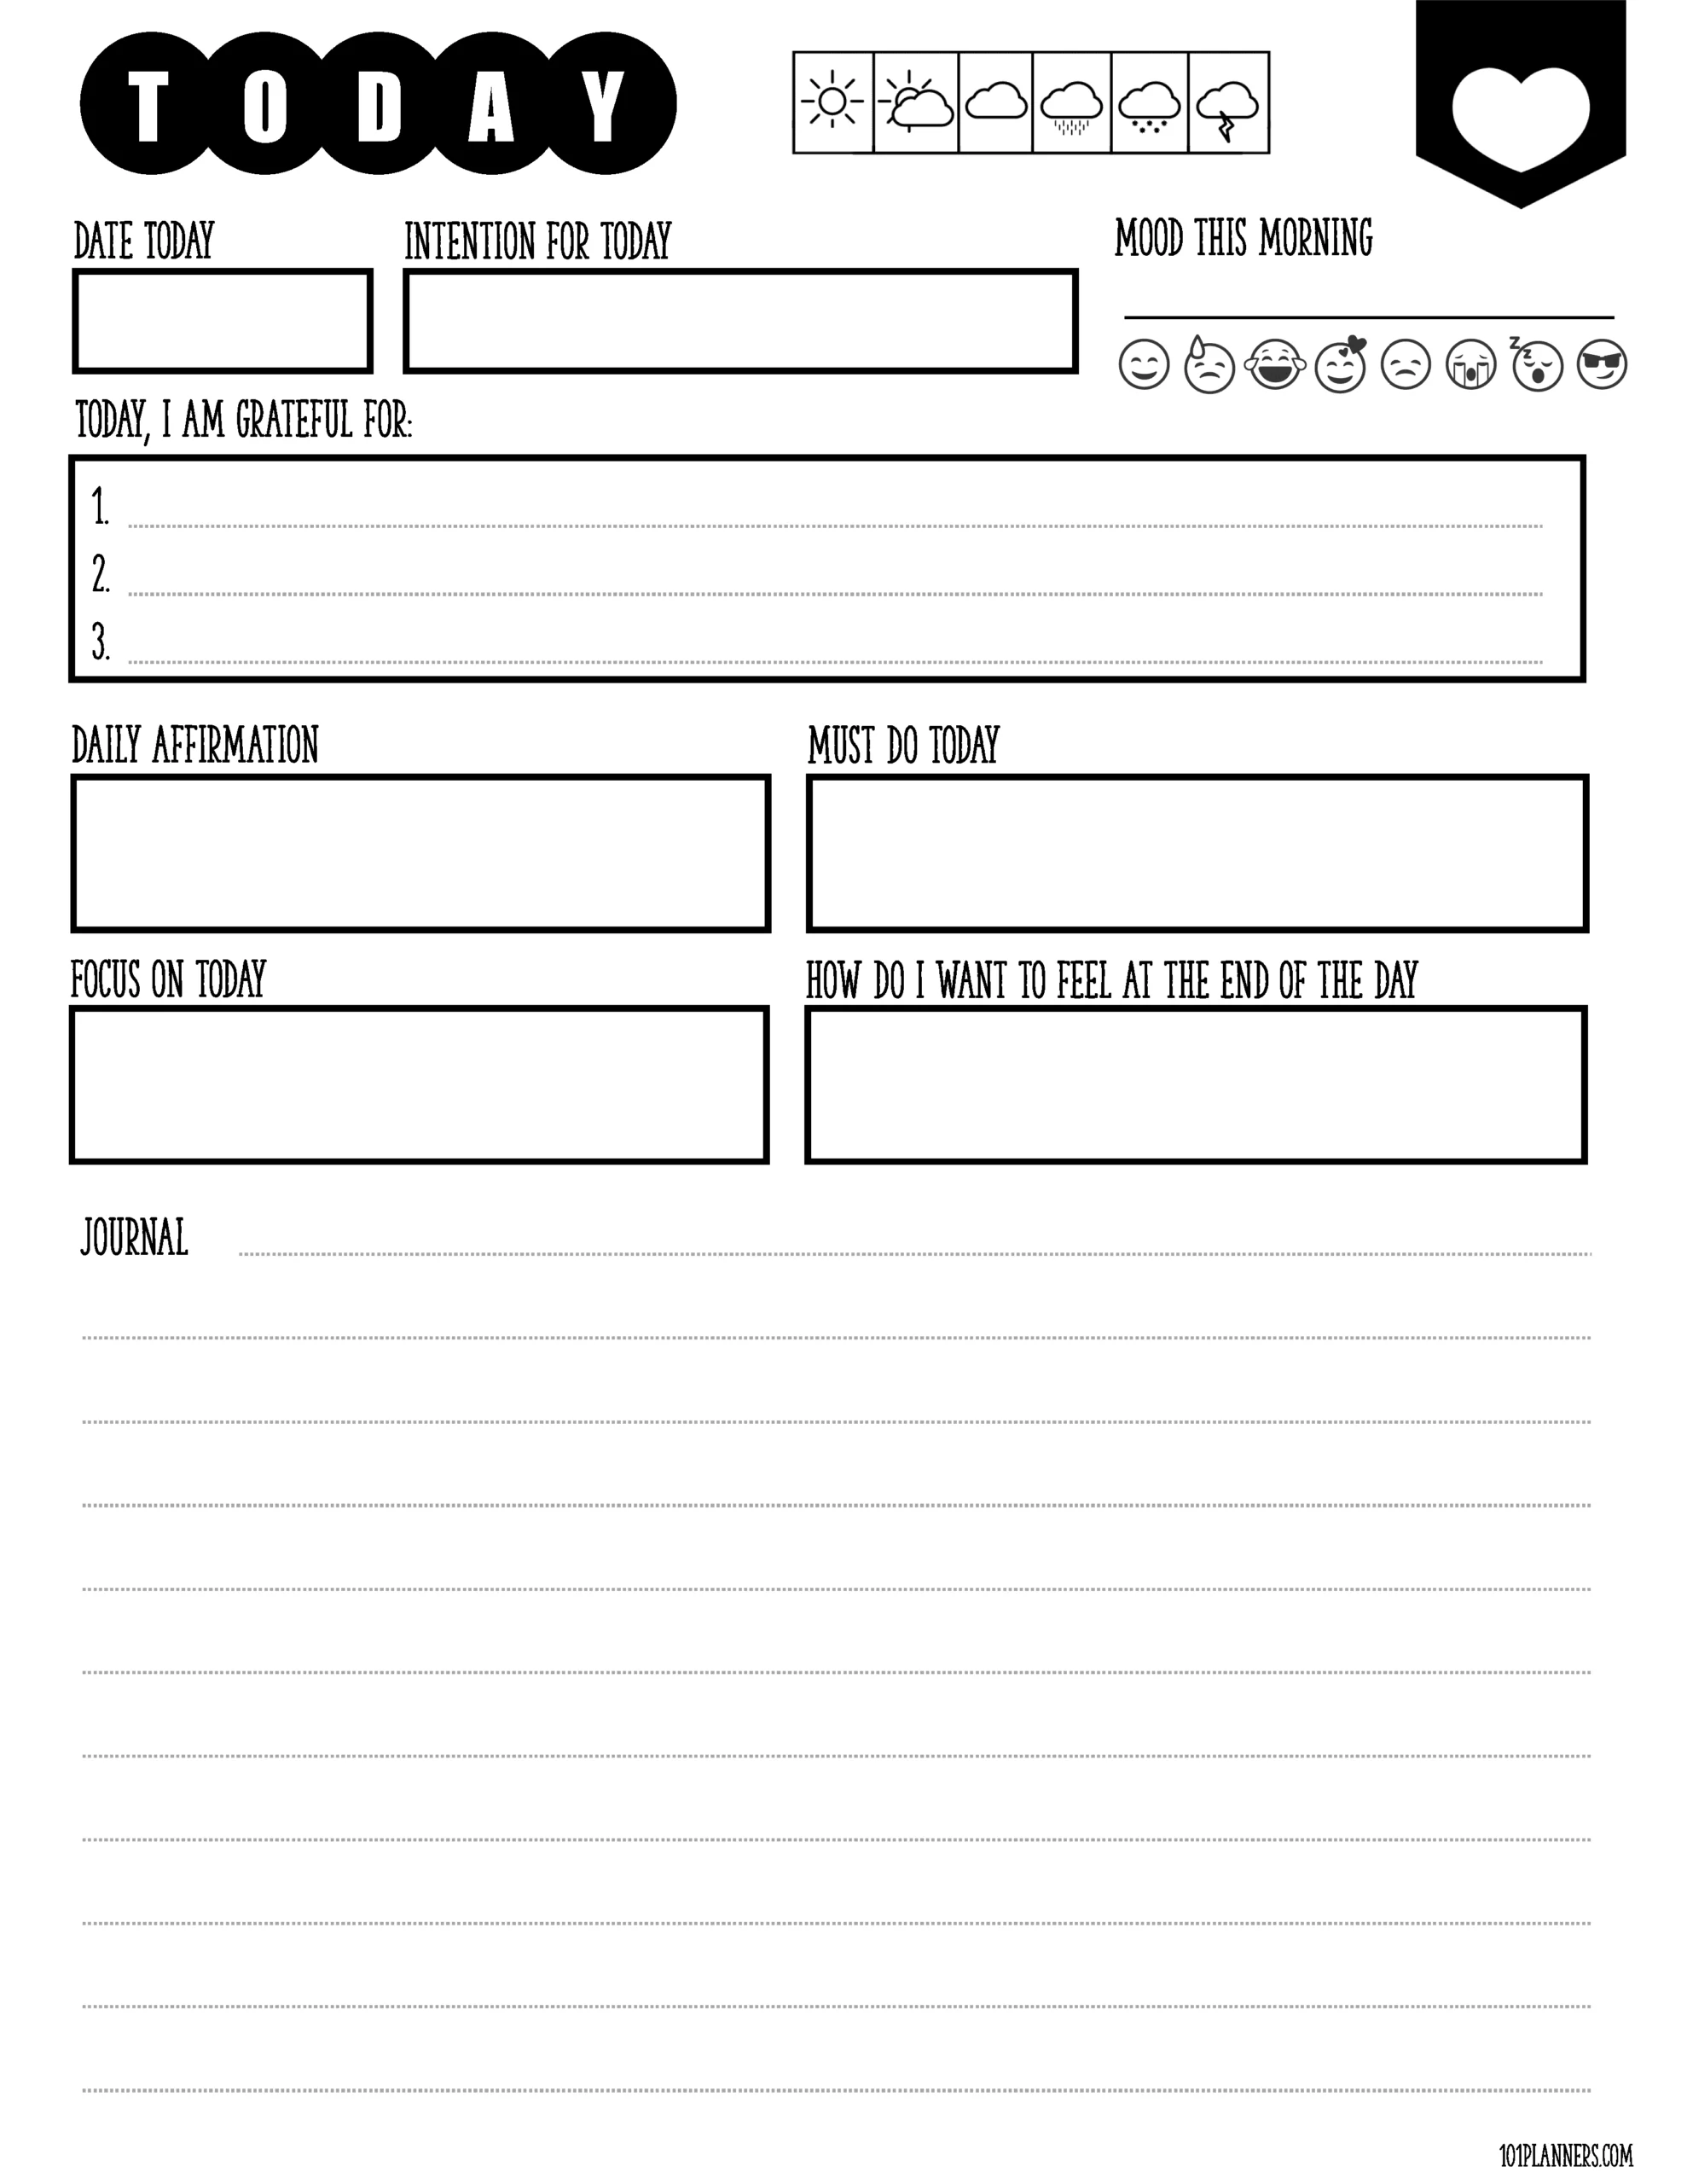 Free Journal Template Printables | Premade Journal Pages - Free Online Printable Journal